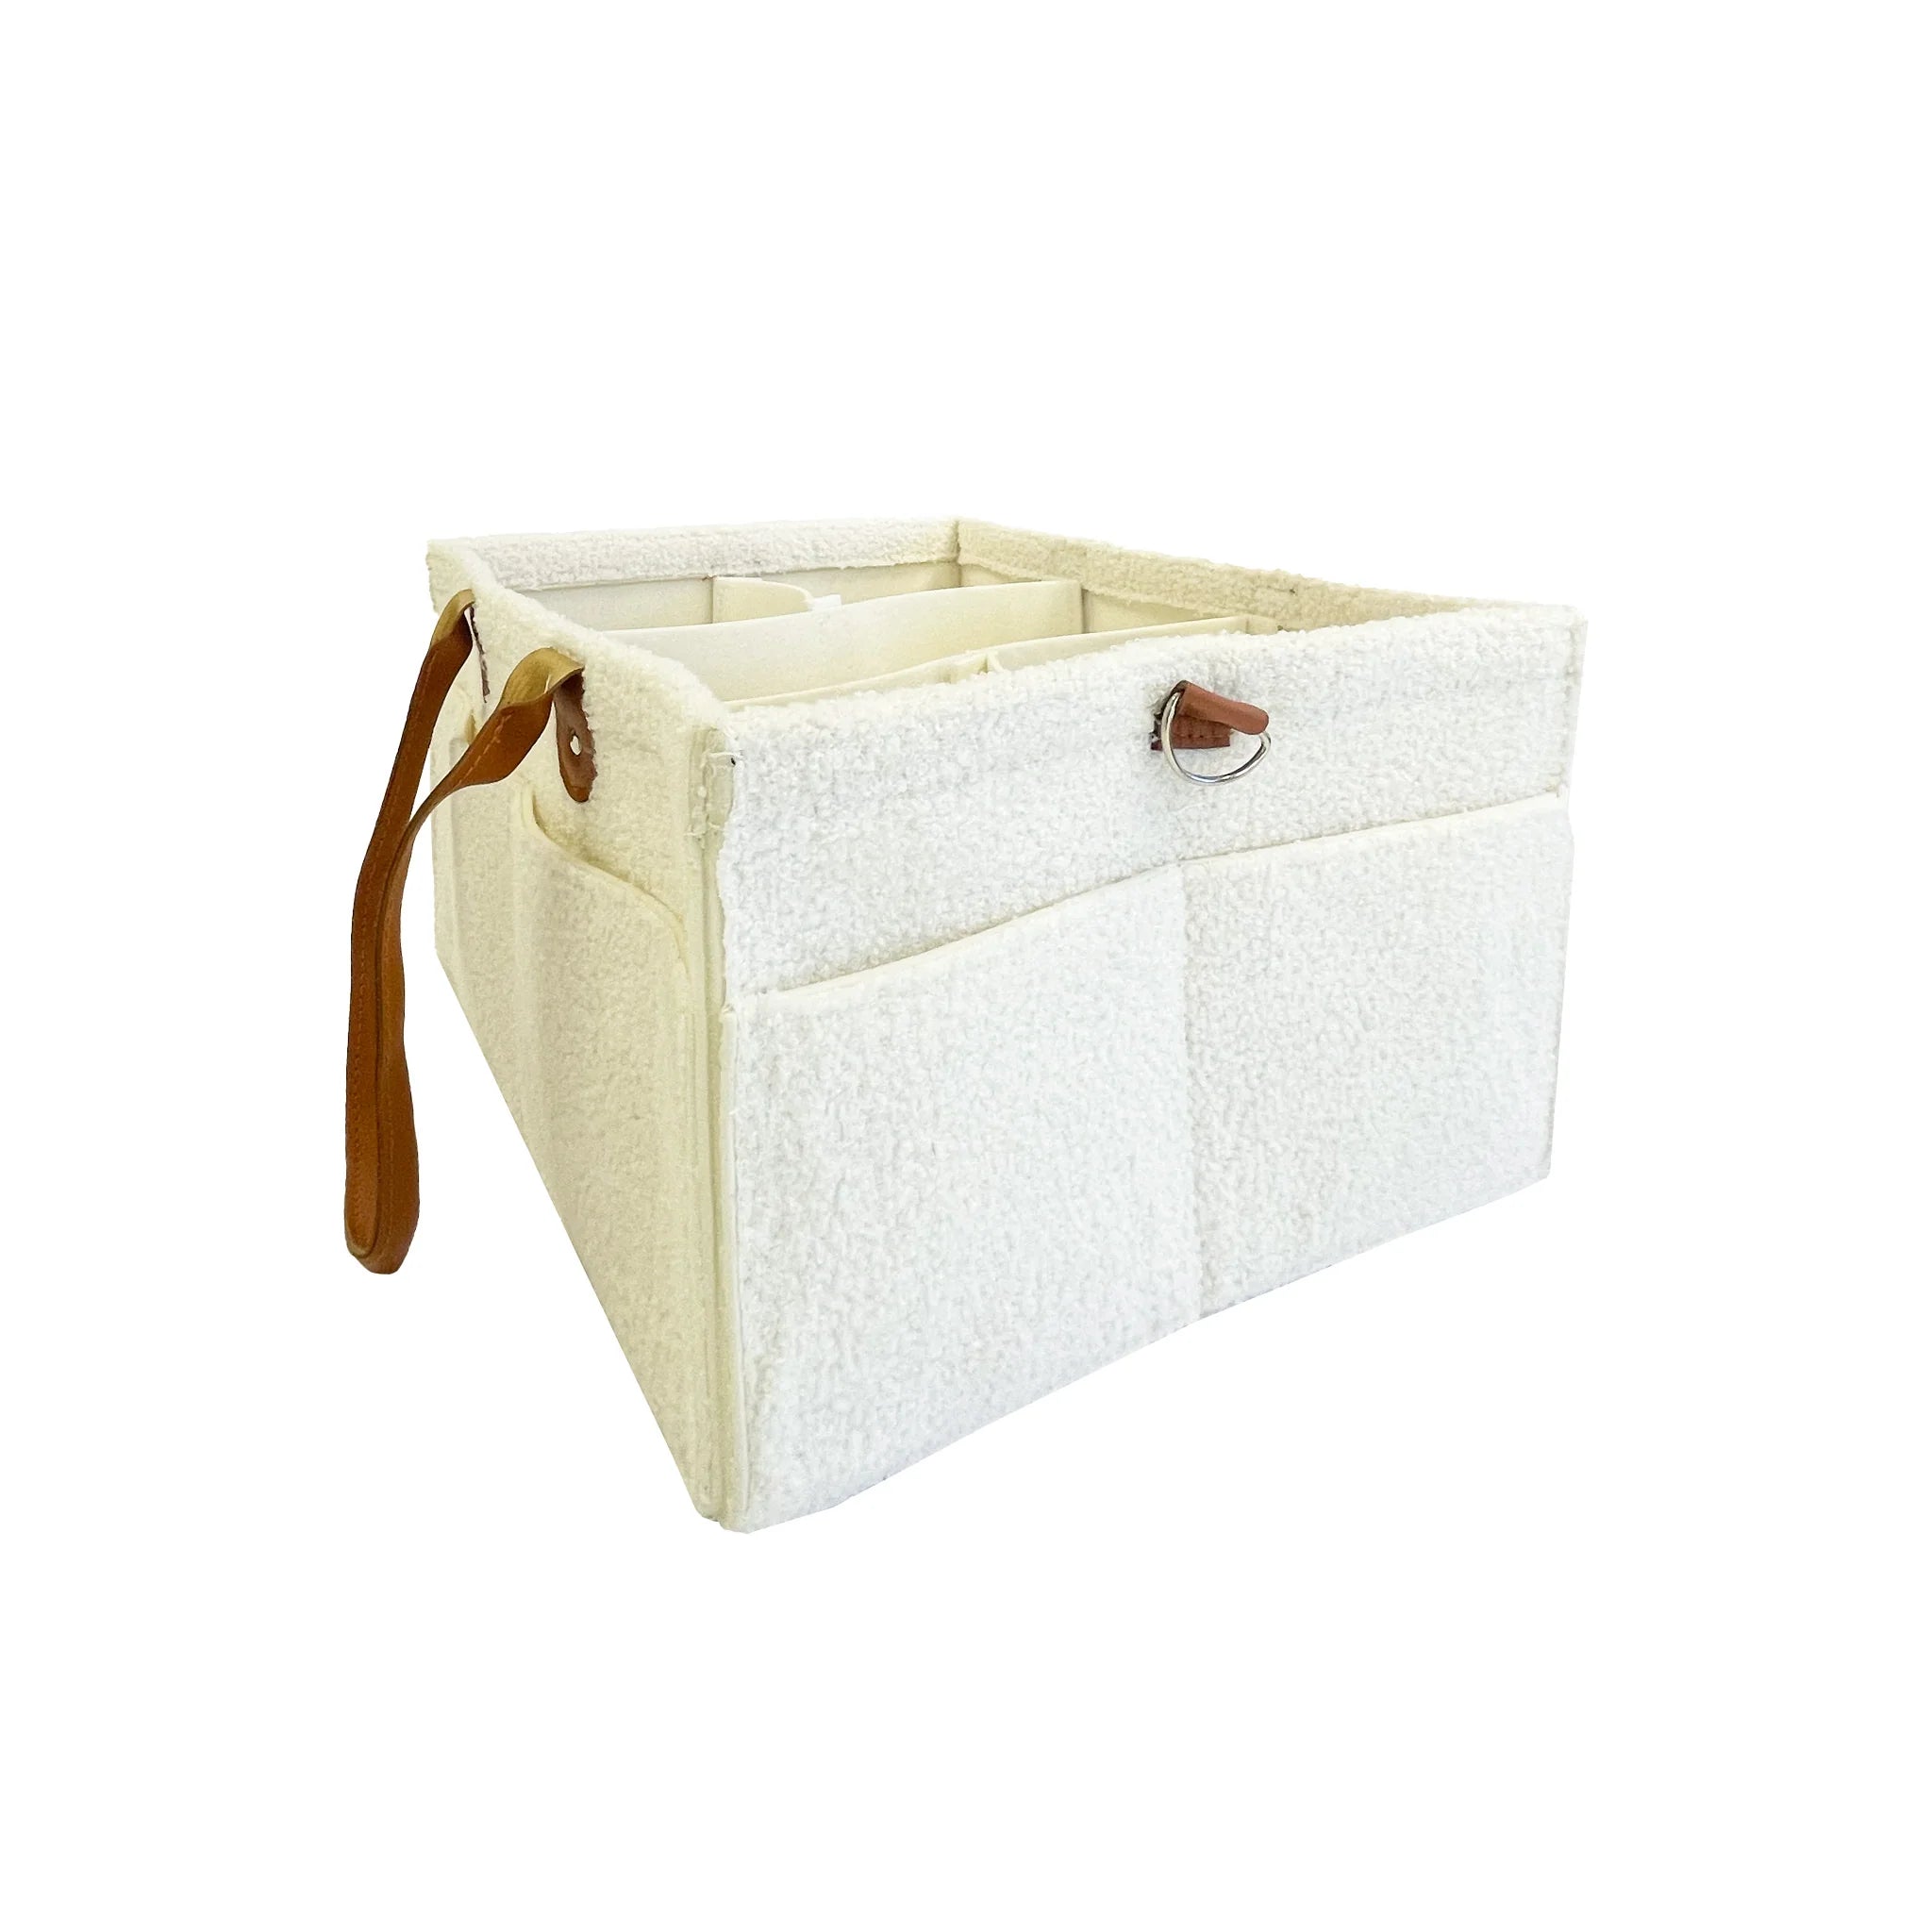 Lactivate Teddy Nursing Caddie - Tiny Tots Baby Store 